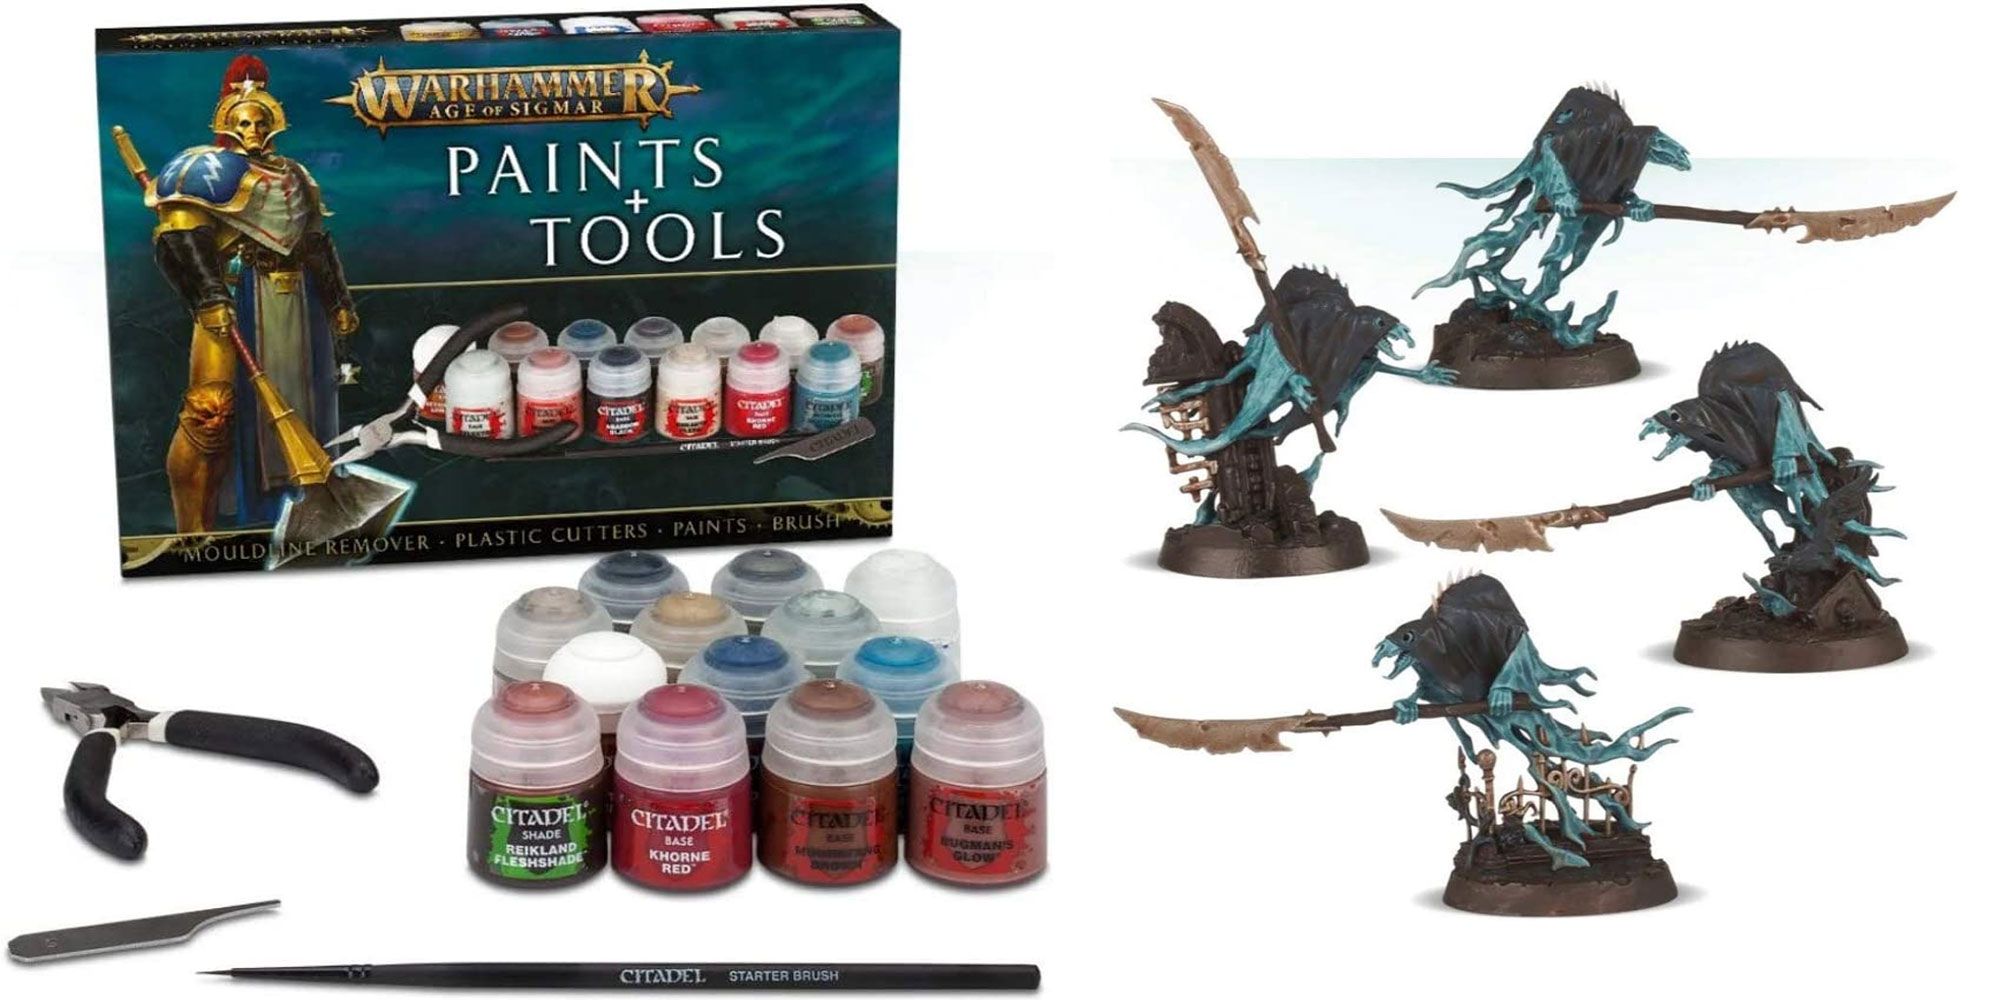 Age of Sigmar Warhammer statues and paint kit